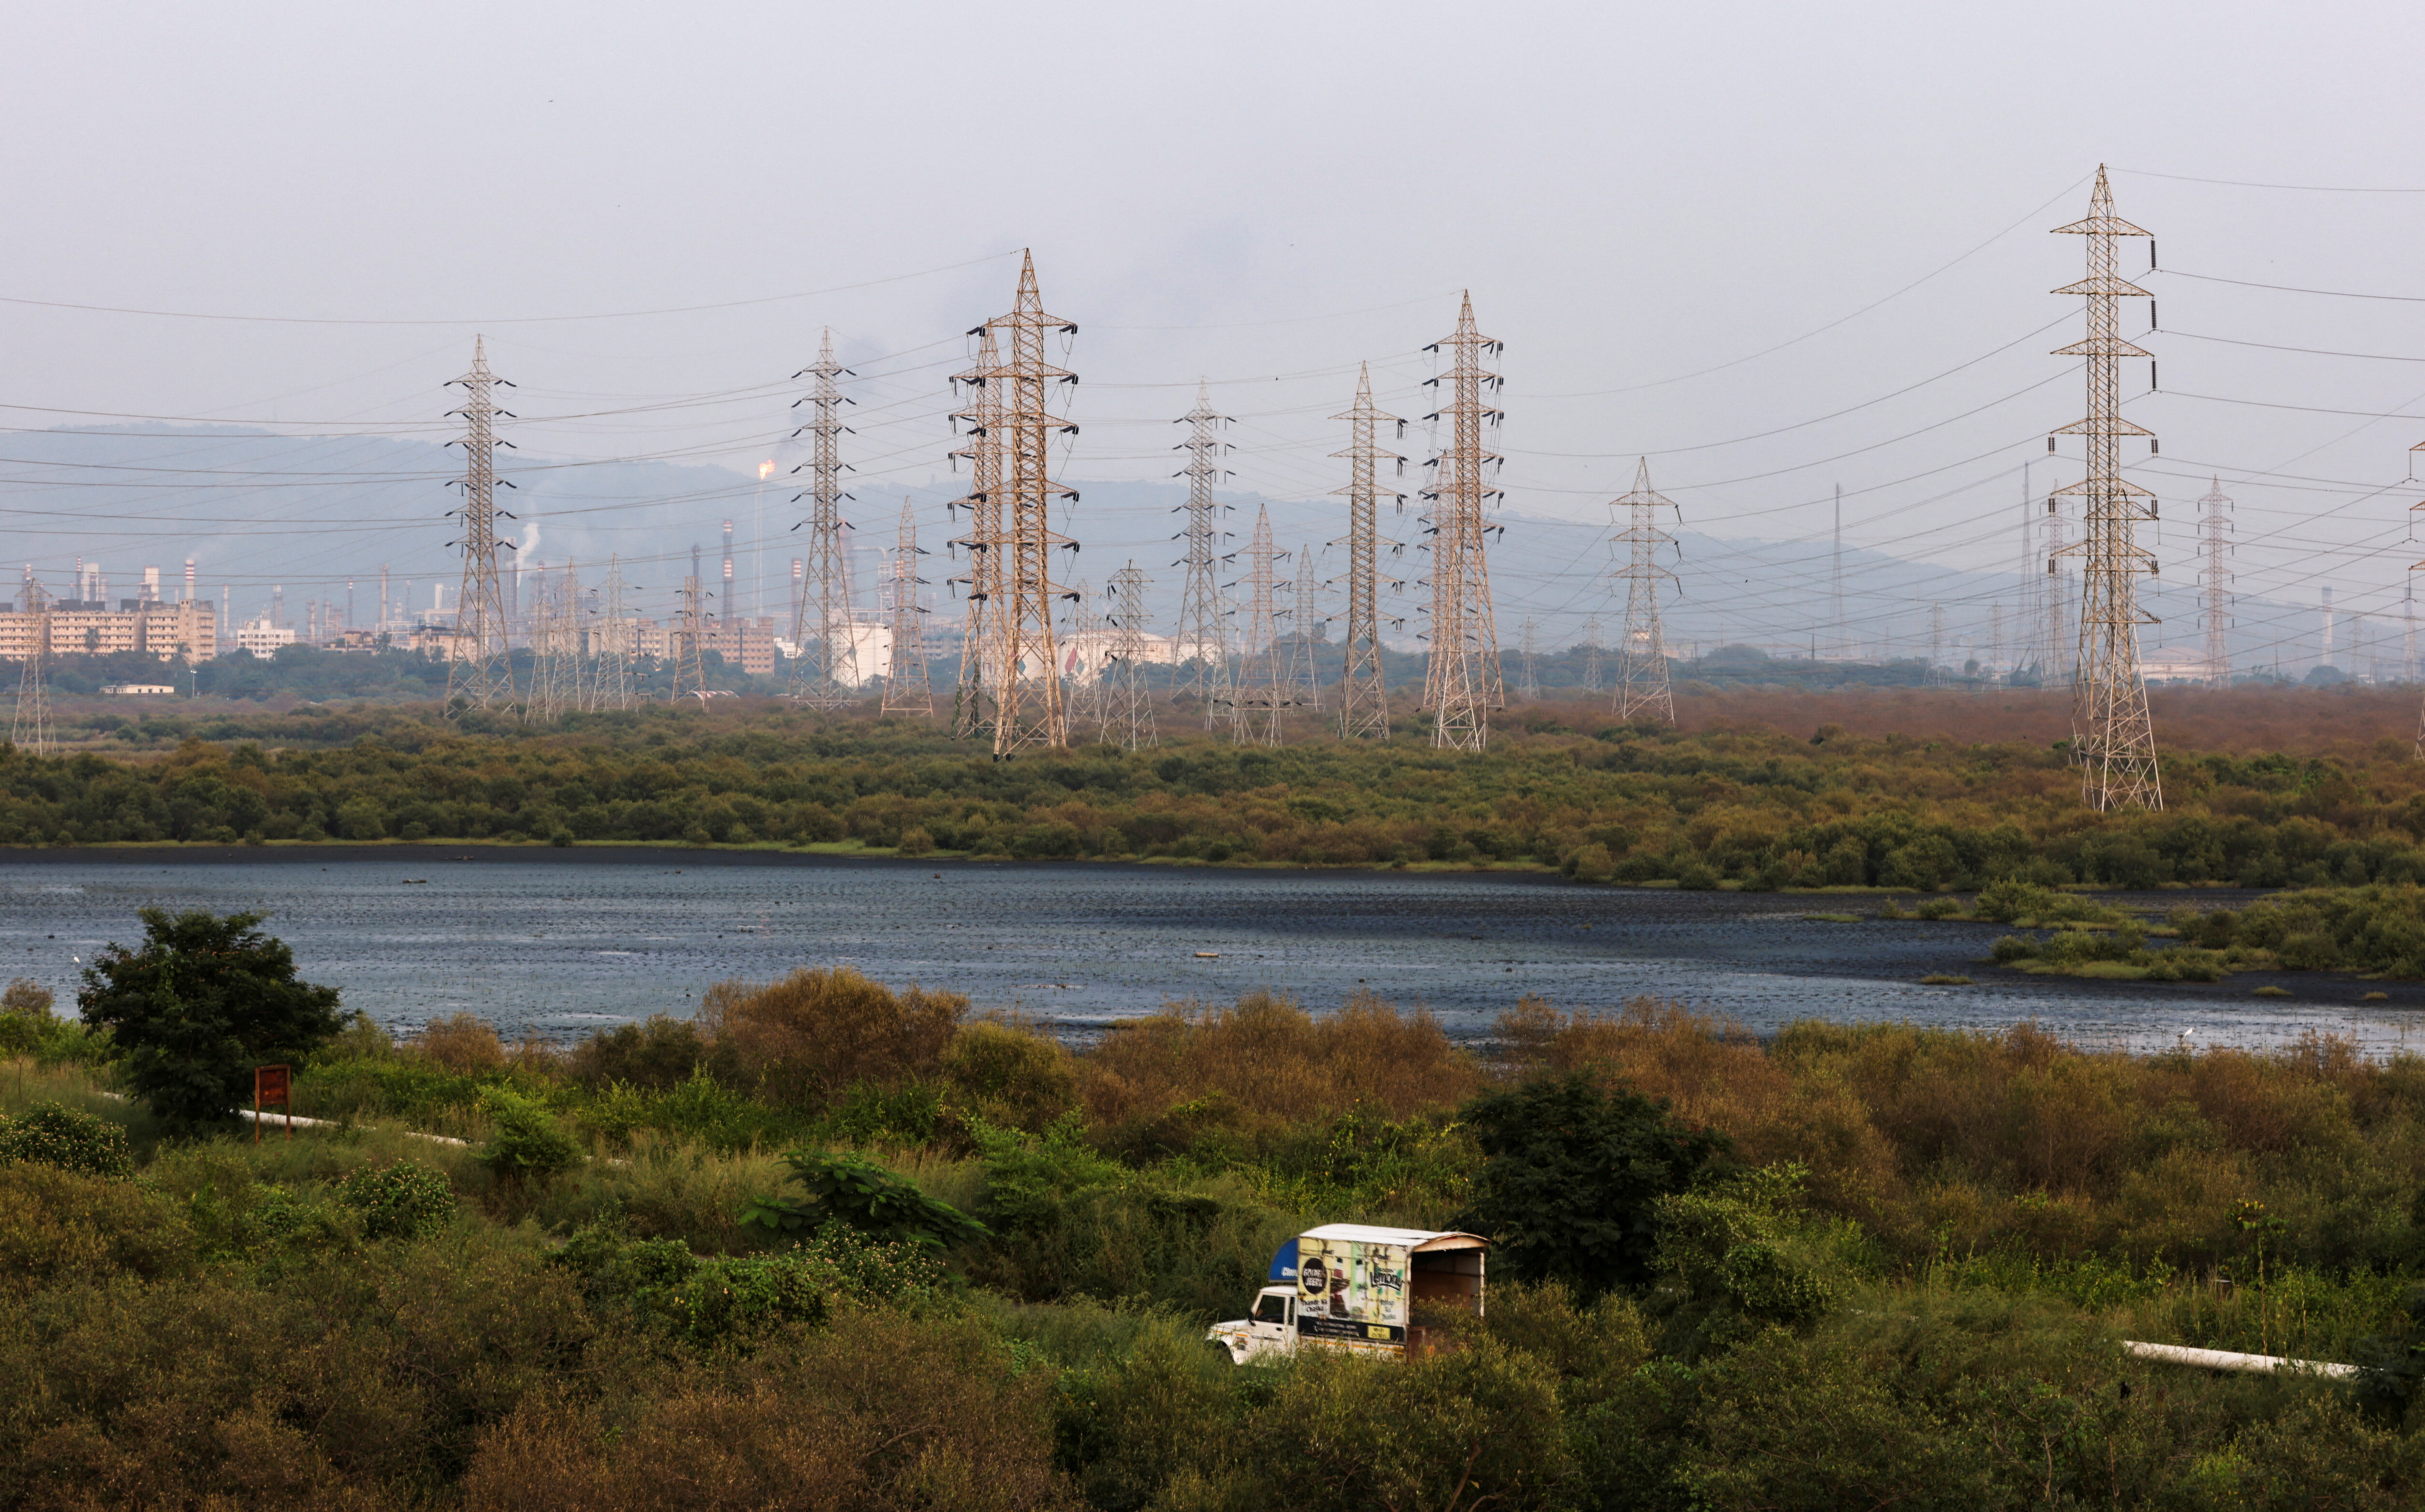 A general view of electricity pylons in Mumbai